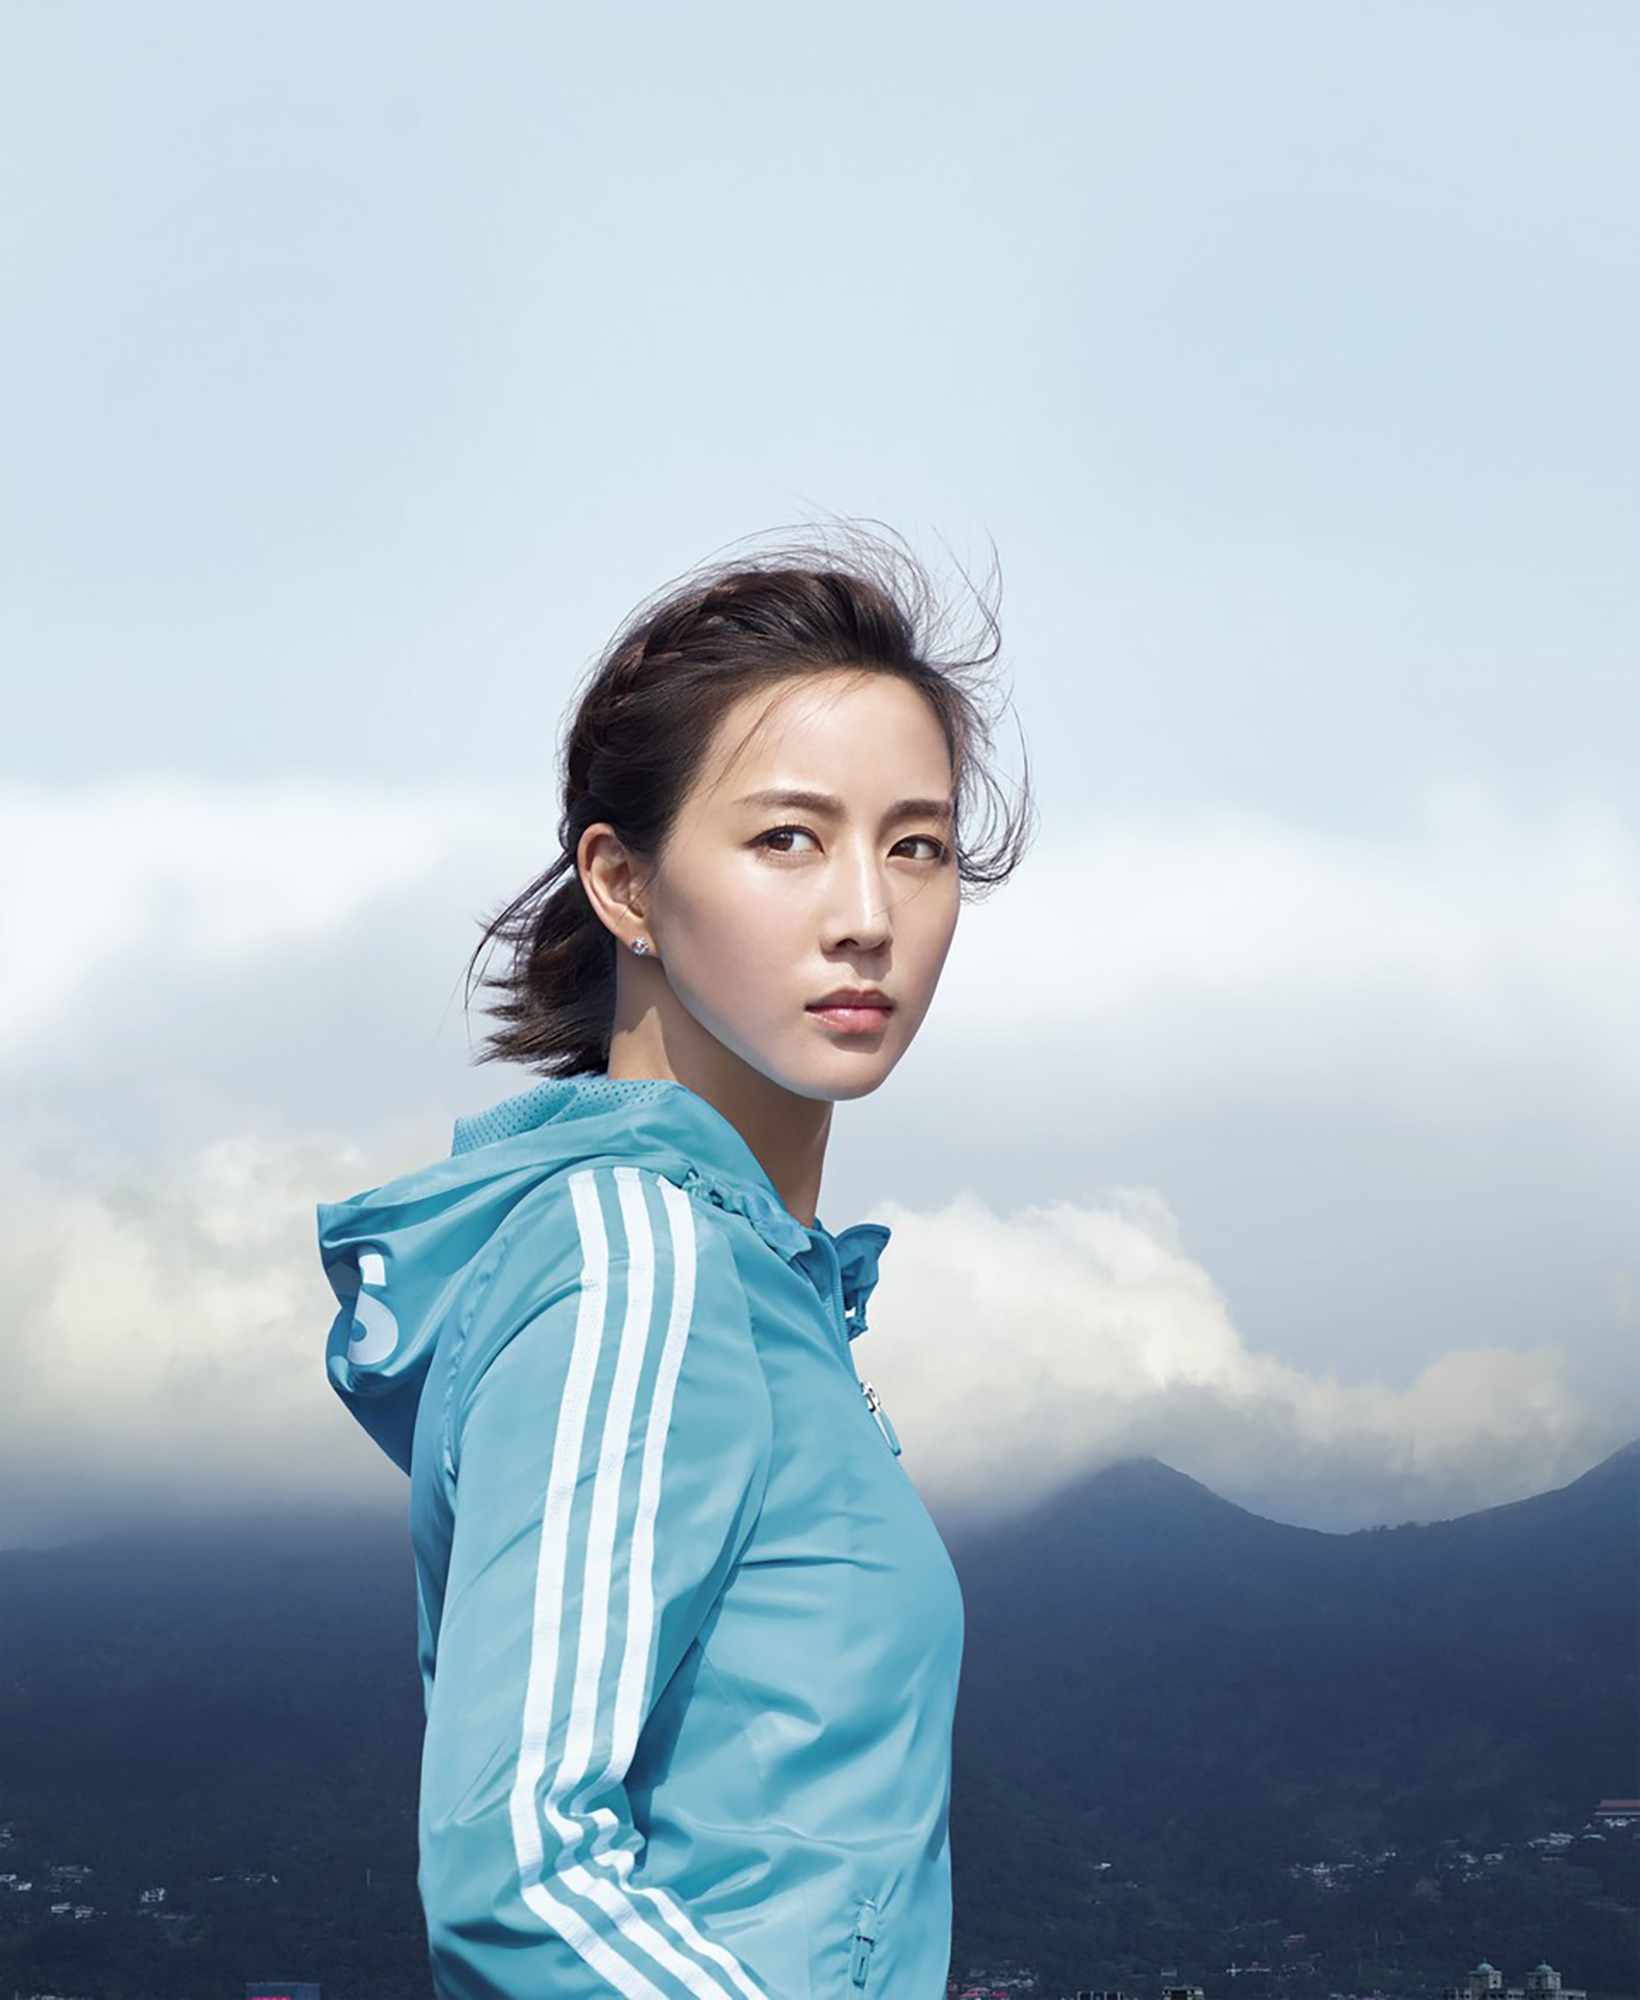 adidas_SS16_Outer-Jacket_Janine-1-2